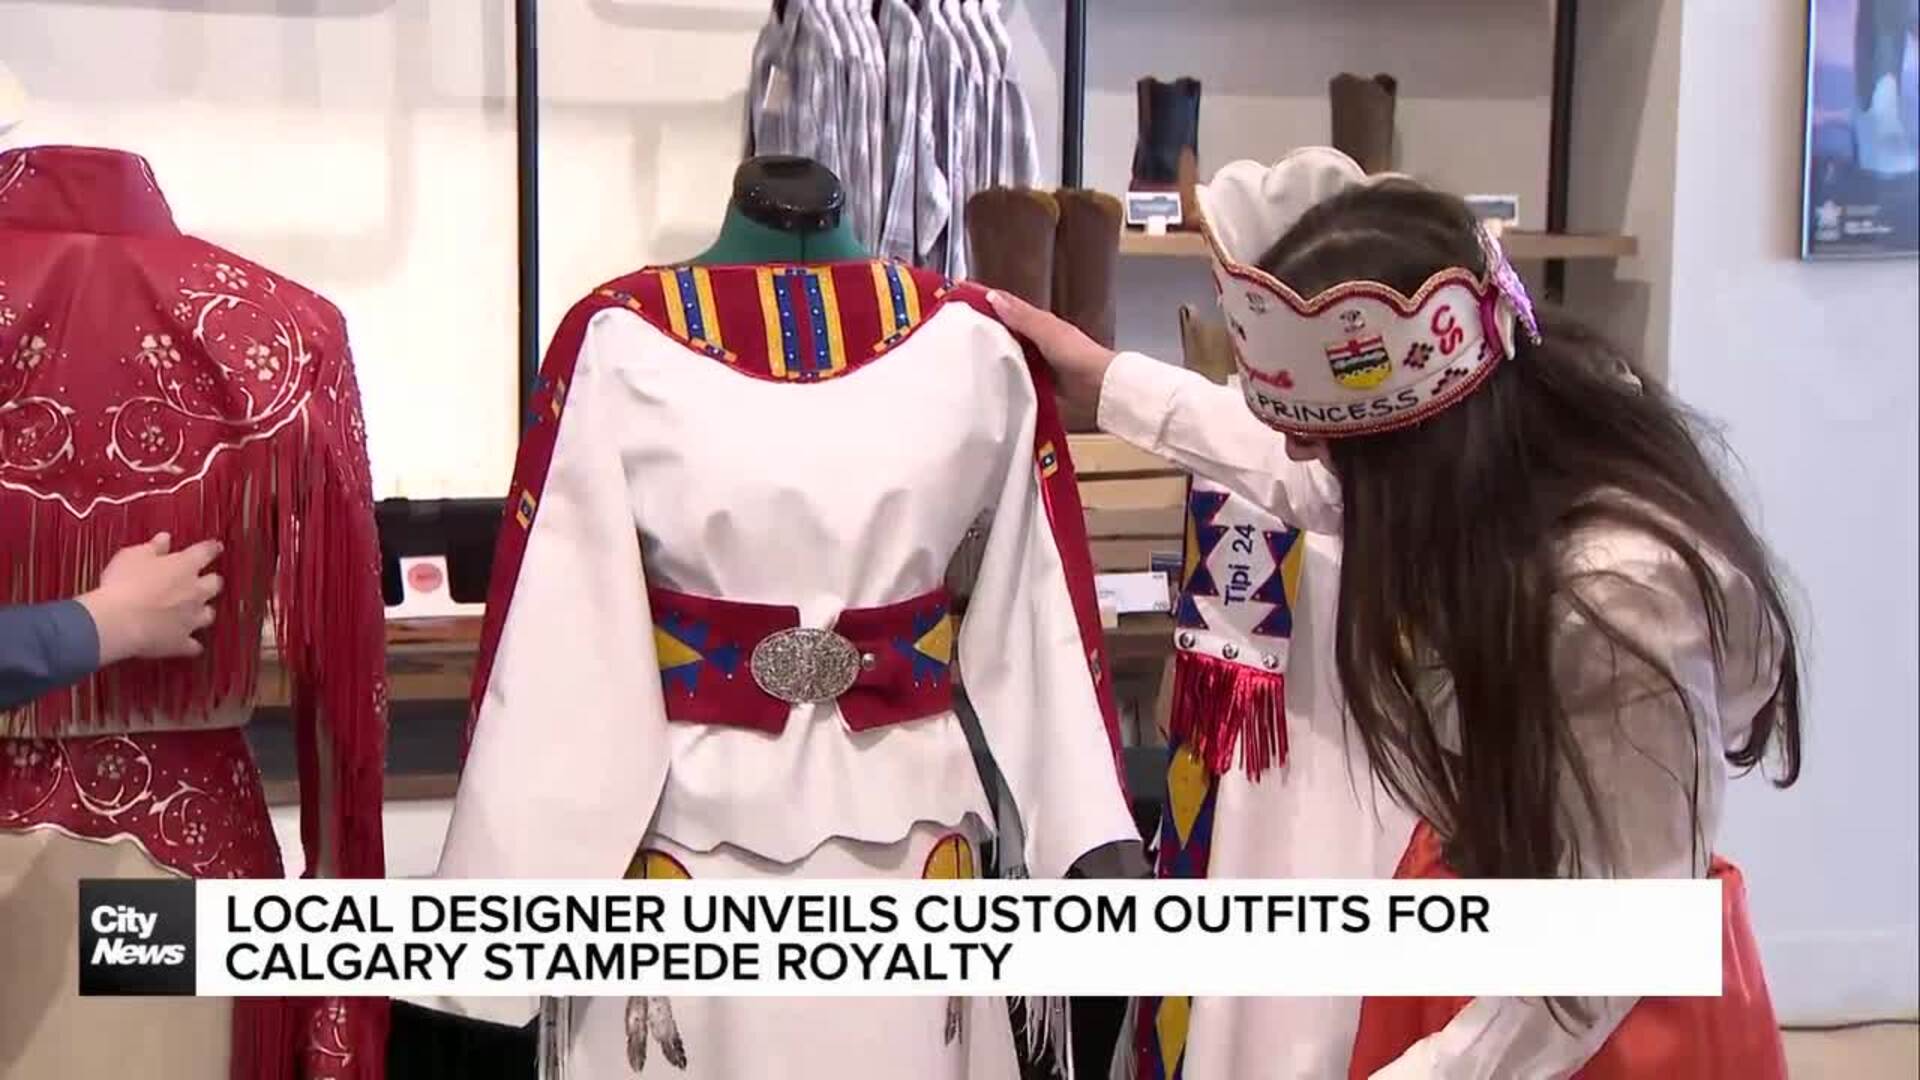 Custom outfits for Calgary Stampede royalty